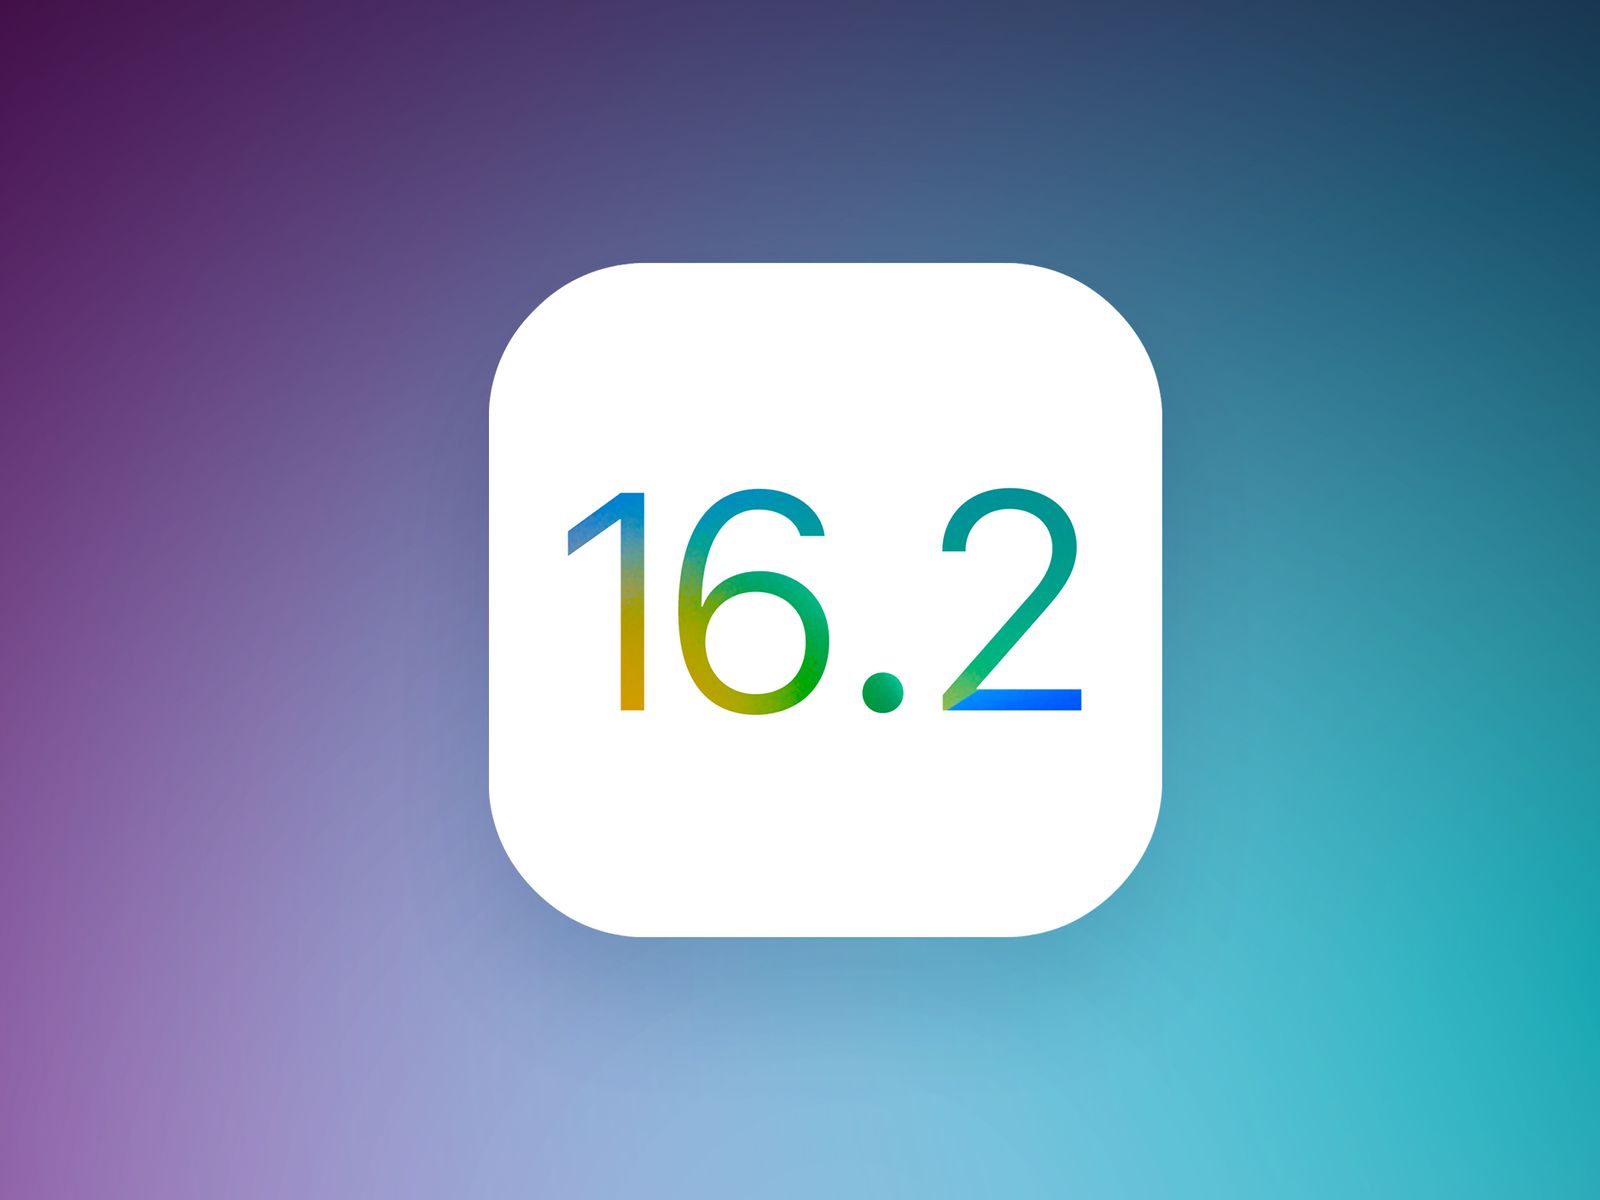 Вышла iOS 16.2 Release Candidate